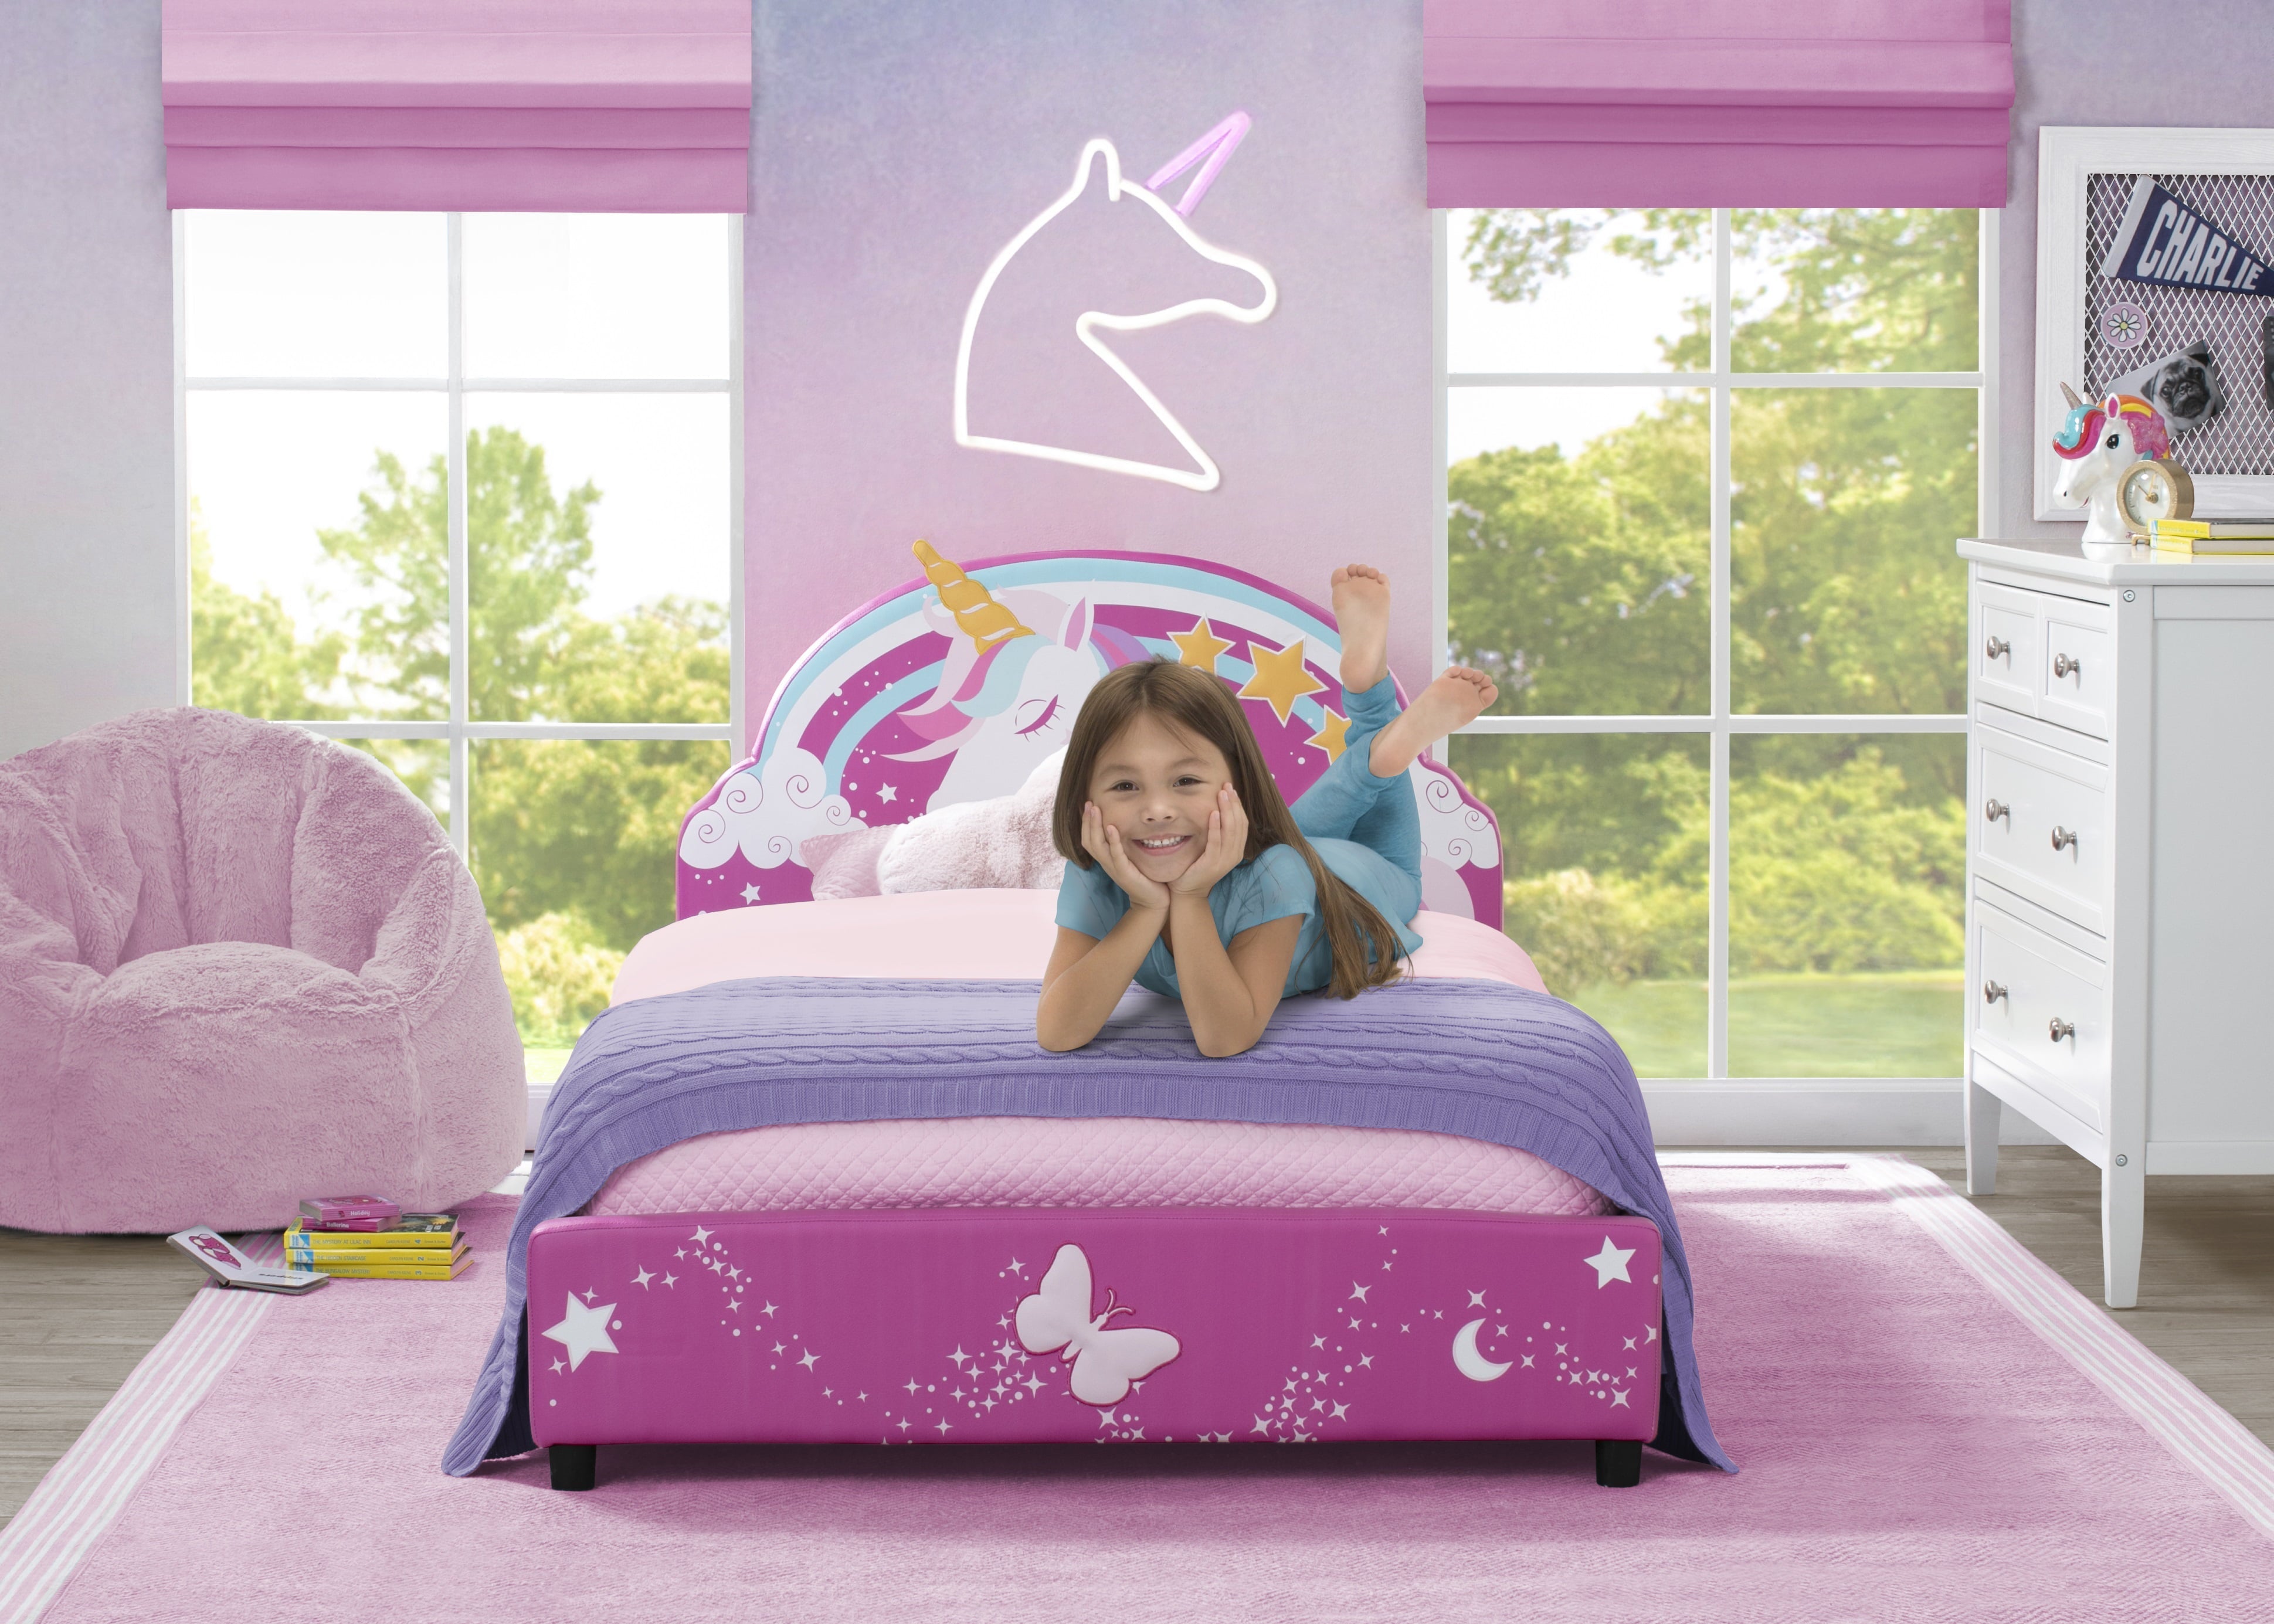 Delta Children Unicorn Upholstered Twin Bed, Pink